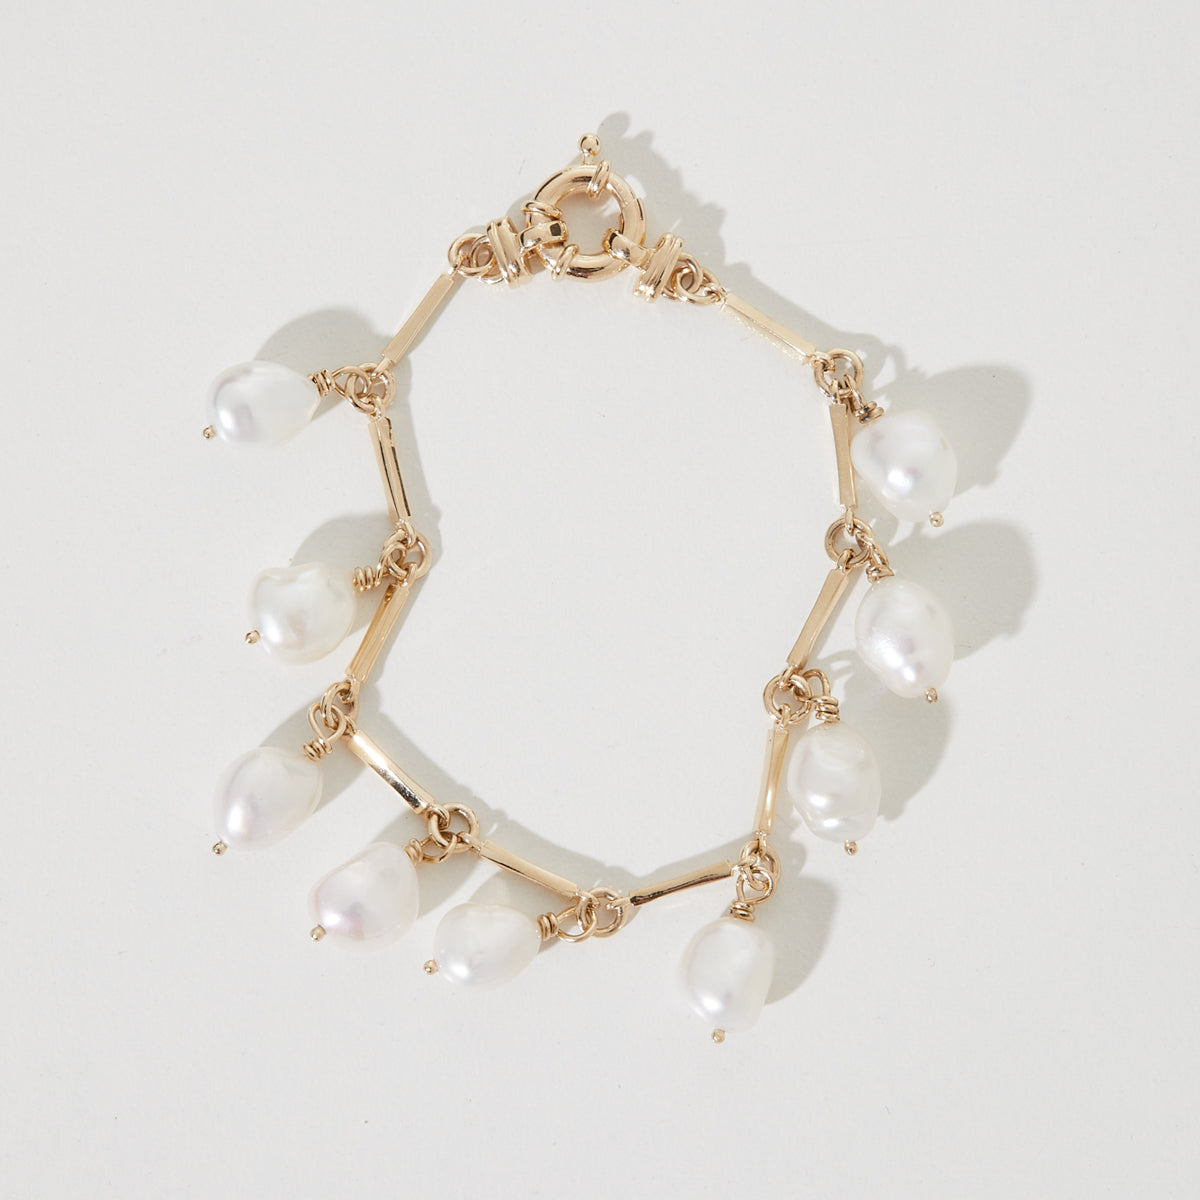 Hand-made Baroque Freshwater Pearl Jewellery: our beautiful 9ct yellow gold baroque pearl link bracelet with a fob closure, drenched in sunlight